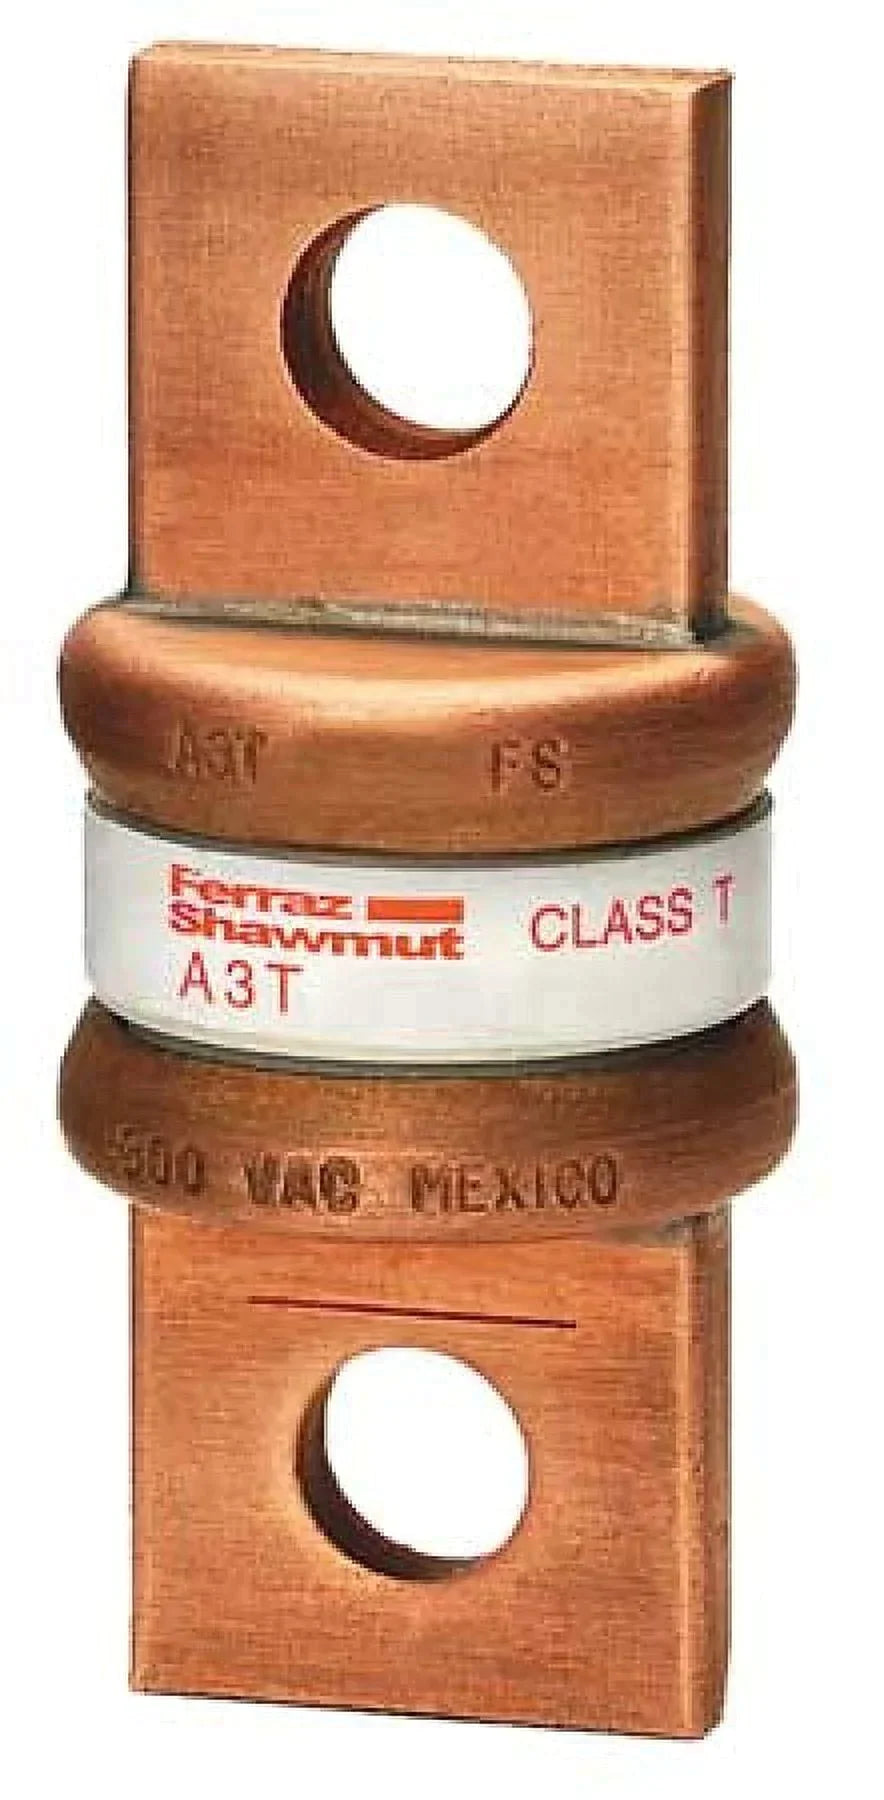 Fuse Amp-Trap® 300V 50A Fast-Acting Class T A3T Series